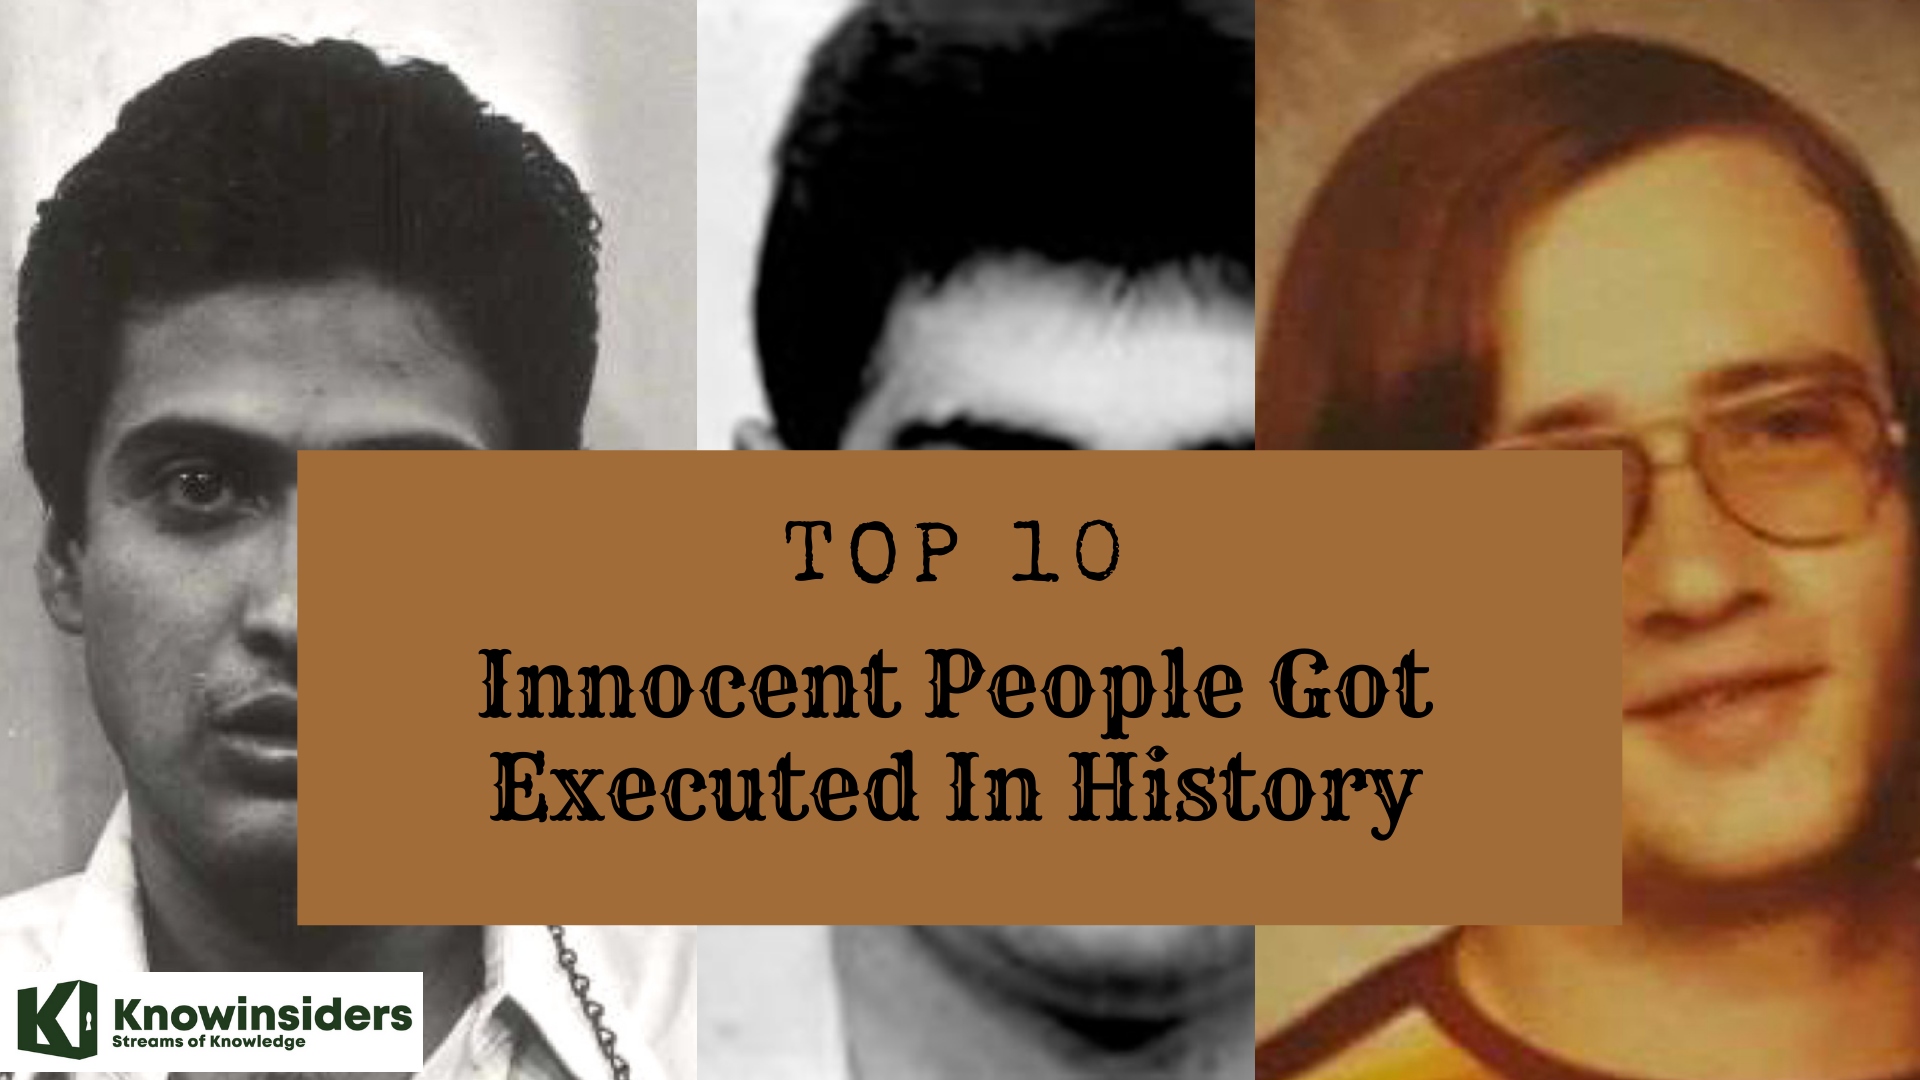 Top 10 Innocent People Executed In History